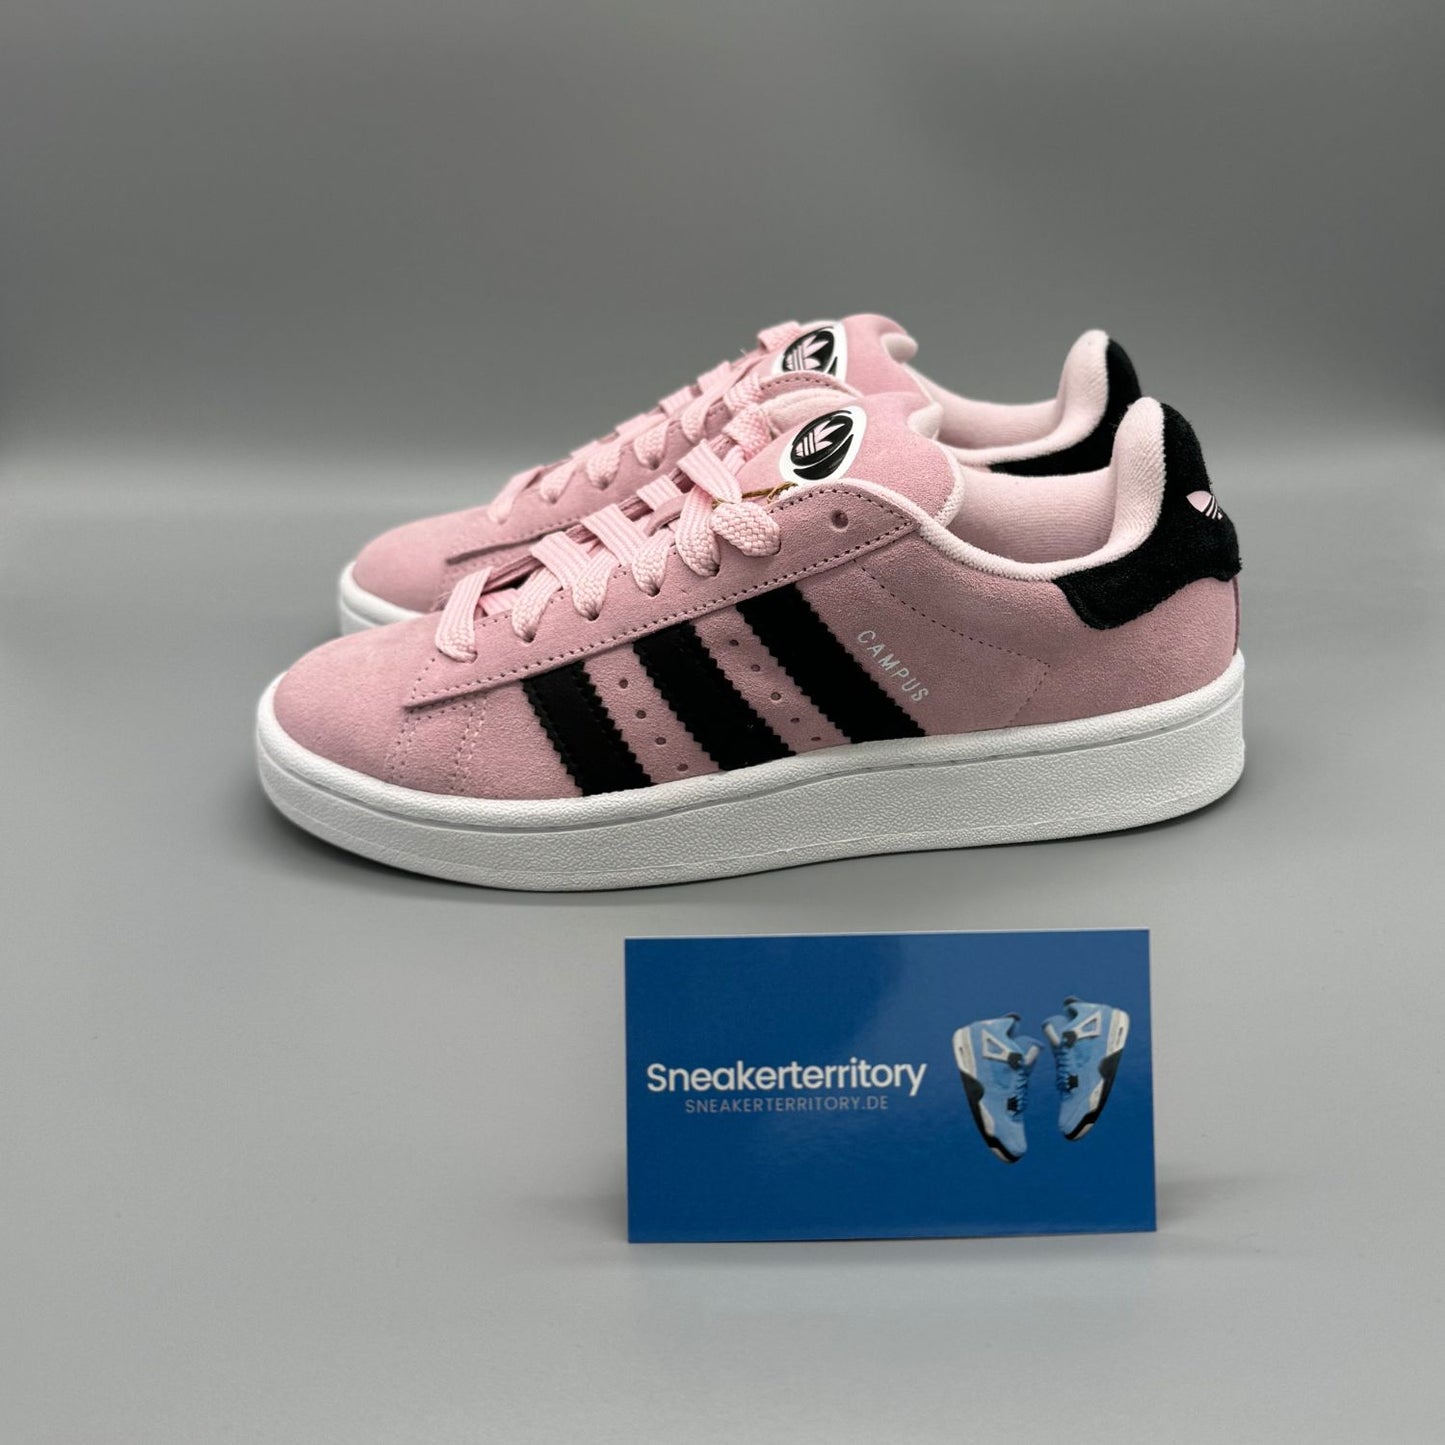 Adidas Campus 00s Clear Pink (GS) - Sneakerterritory; Sneaker Territory